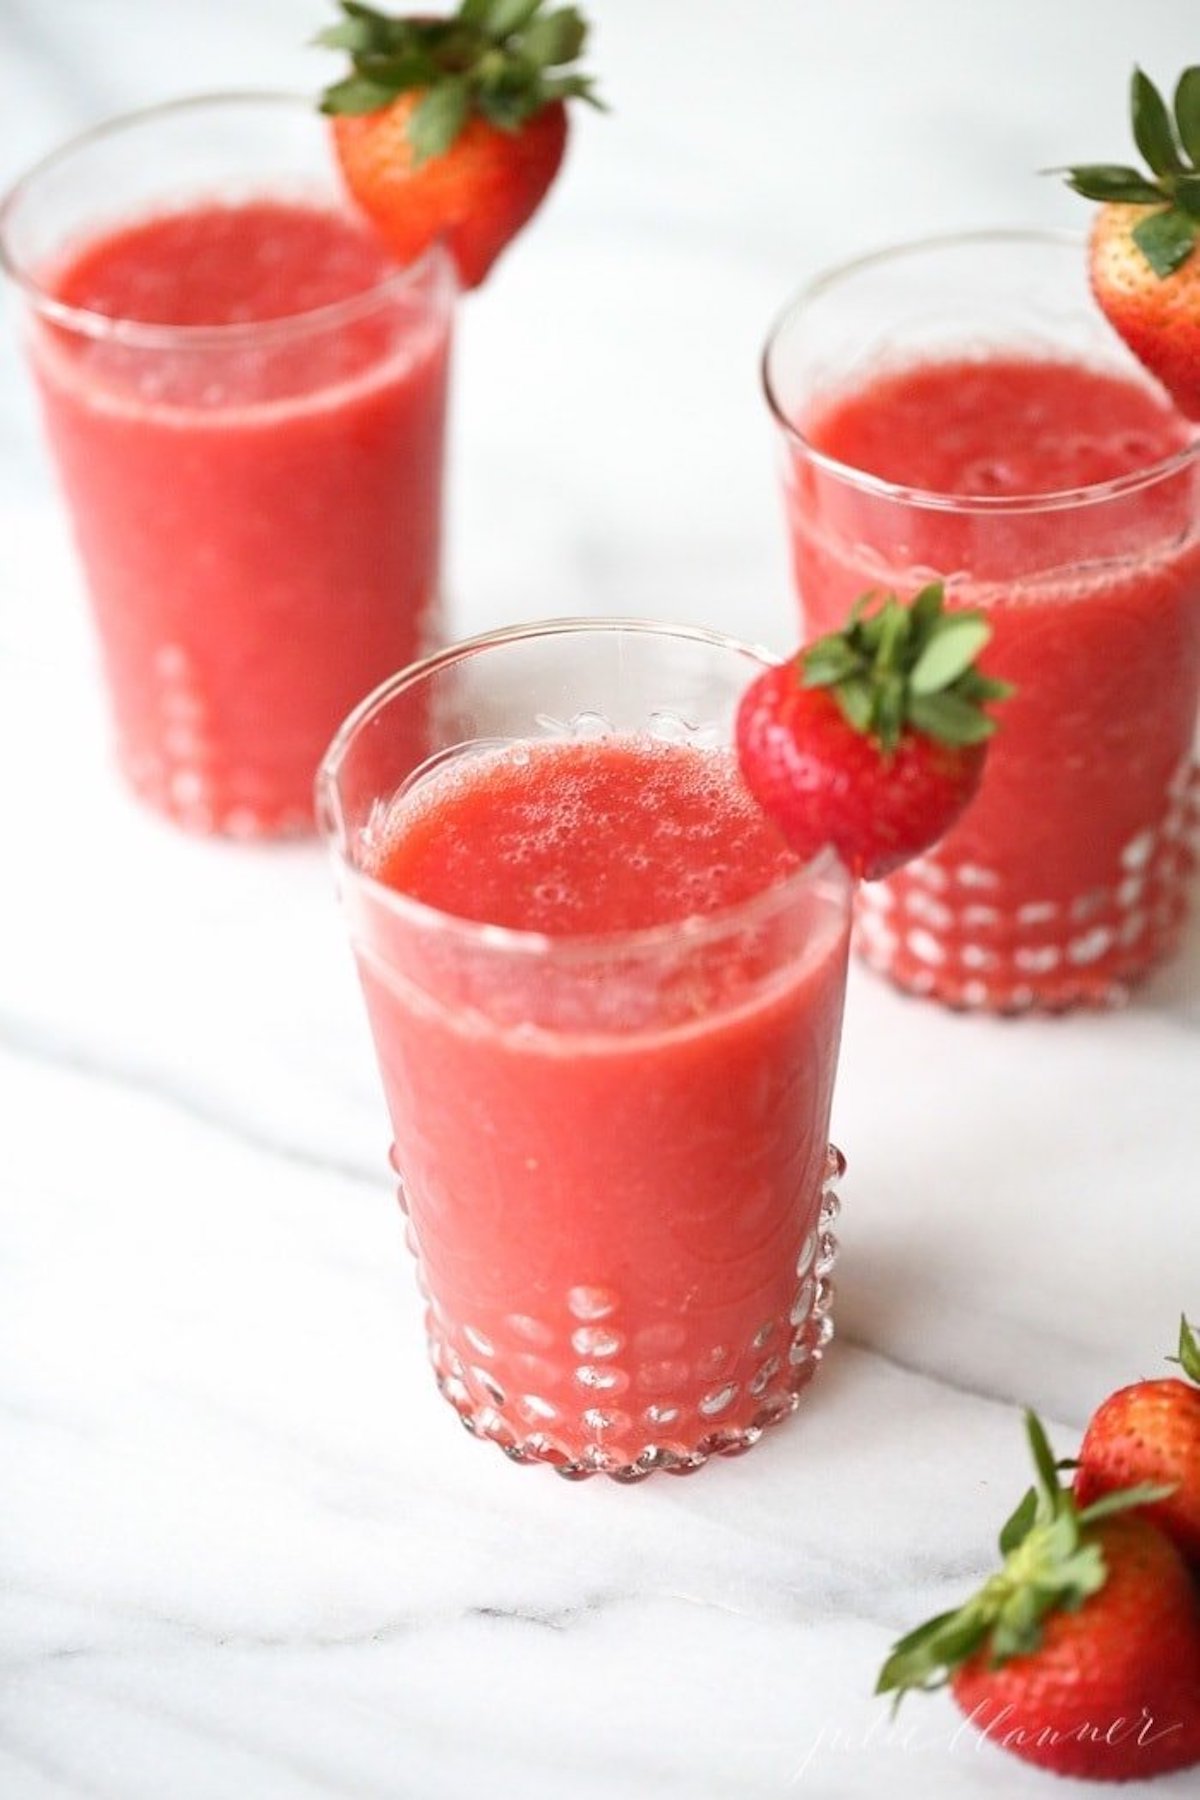 Three glasses of strawberry juice adorned with fresh strawberries, perfect for Valentine's Day recipes.